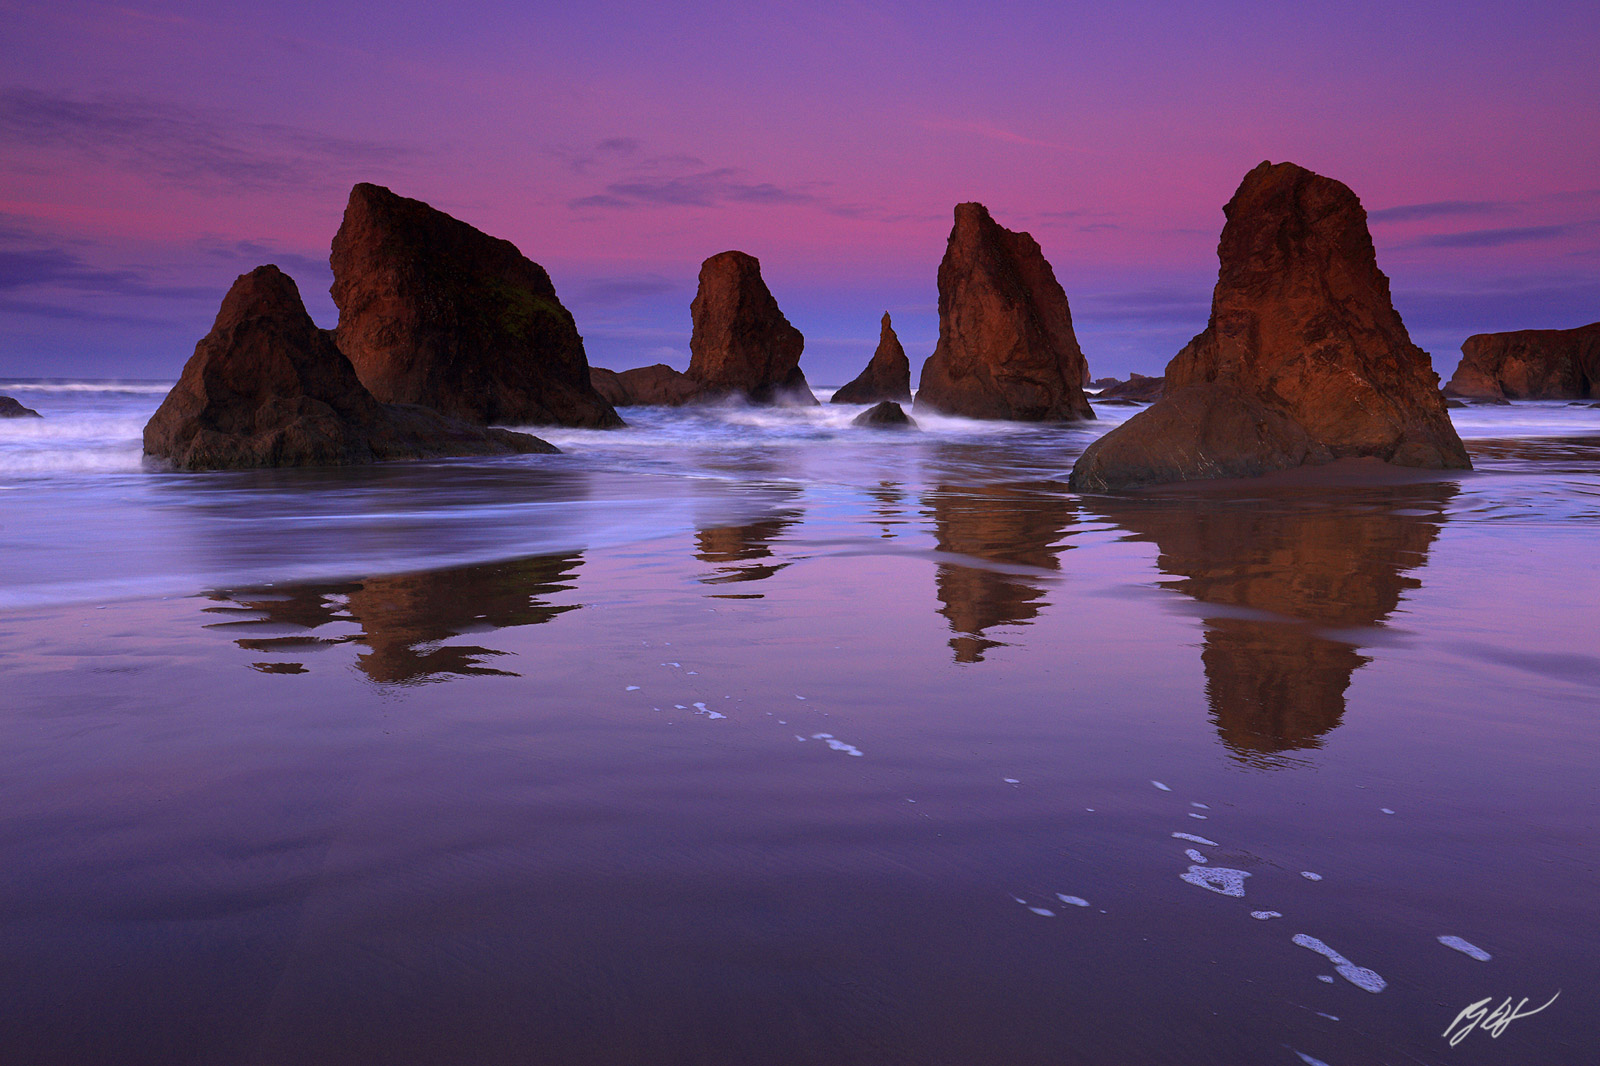 Sunrise and Sea Stacks from Face Rock Beach in Bandon on the Southern Oregon Coast